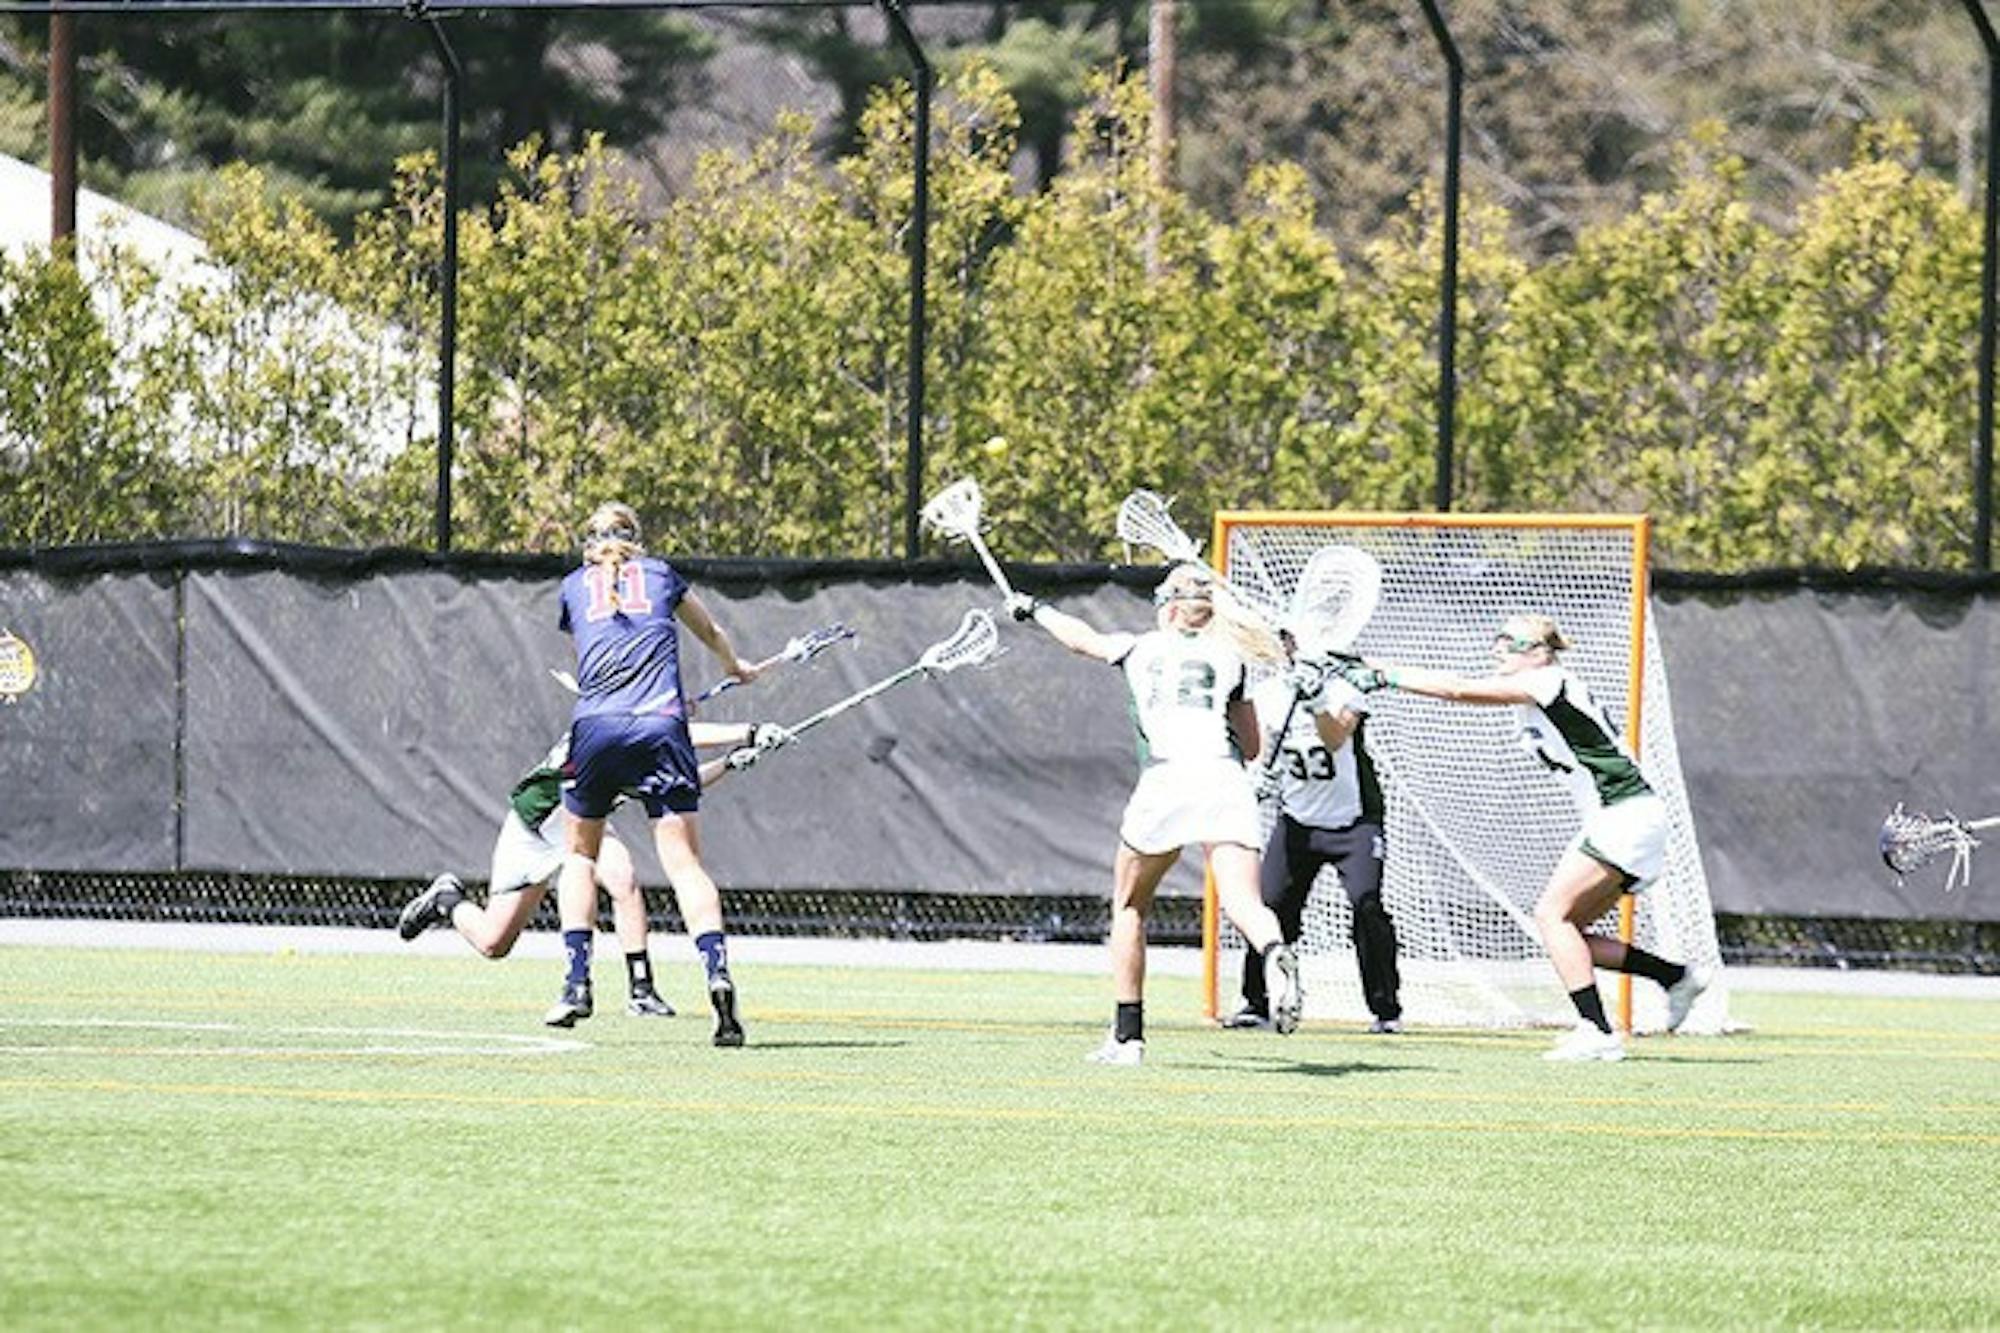 The women's lacrosse team's season came to a close after a 15-5 loss to Syracuse University on Sunday.